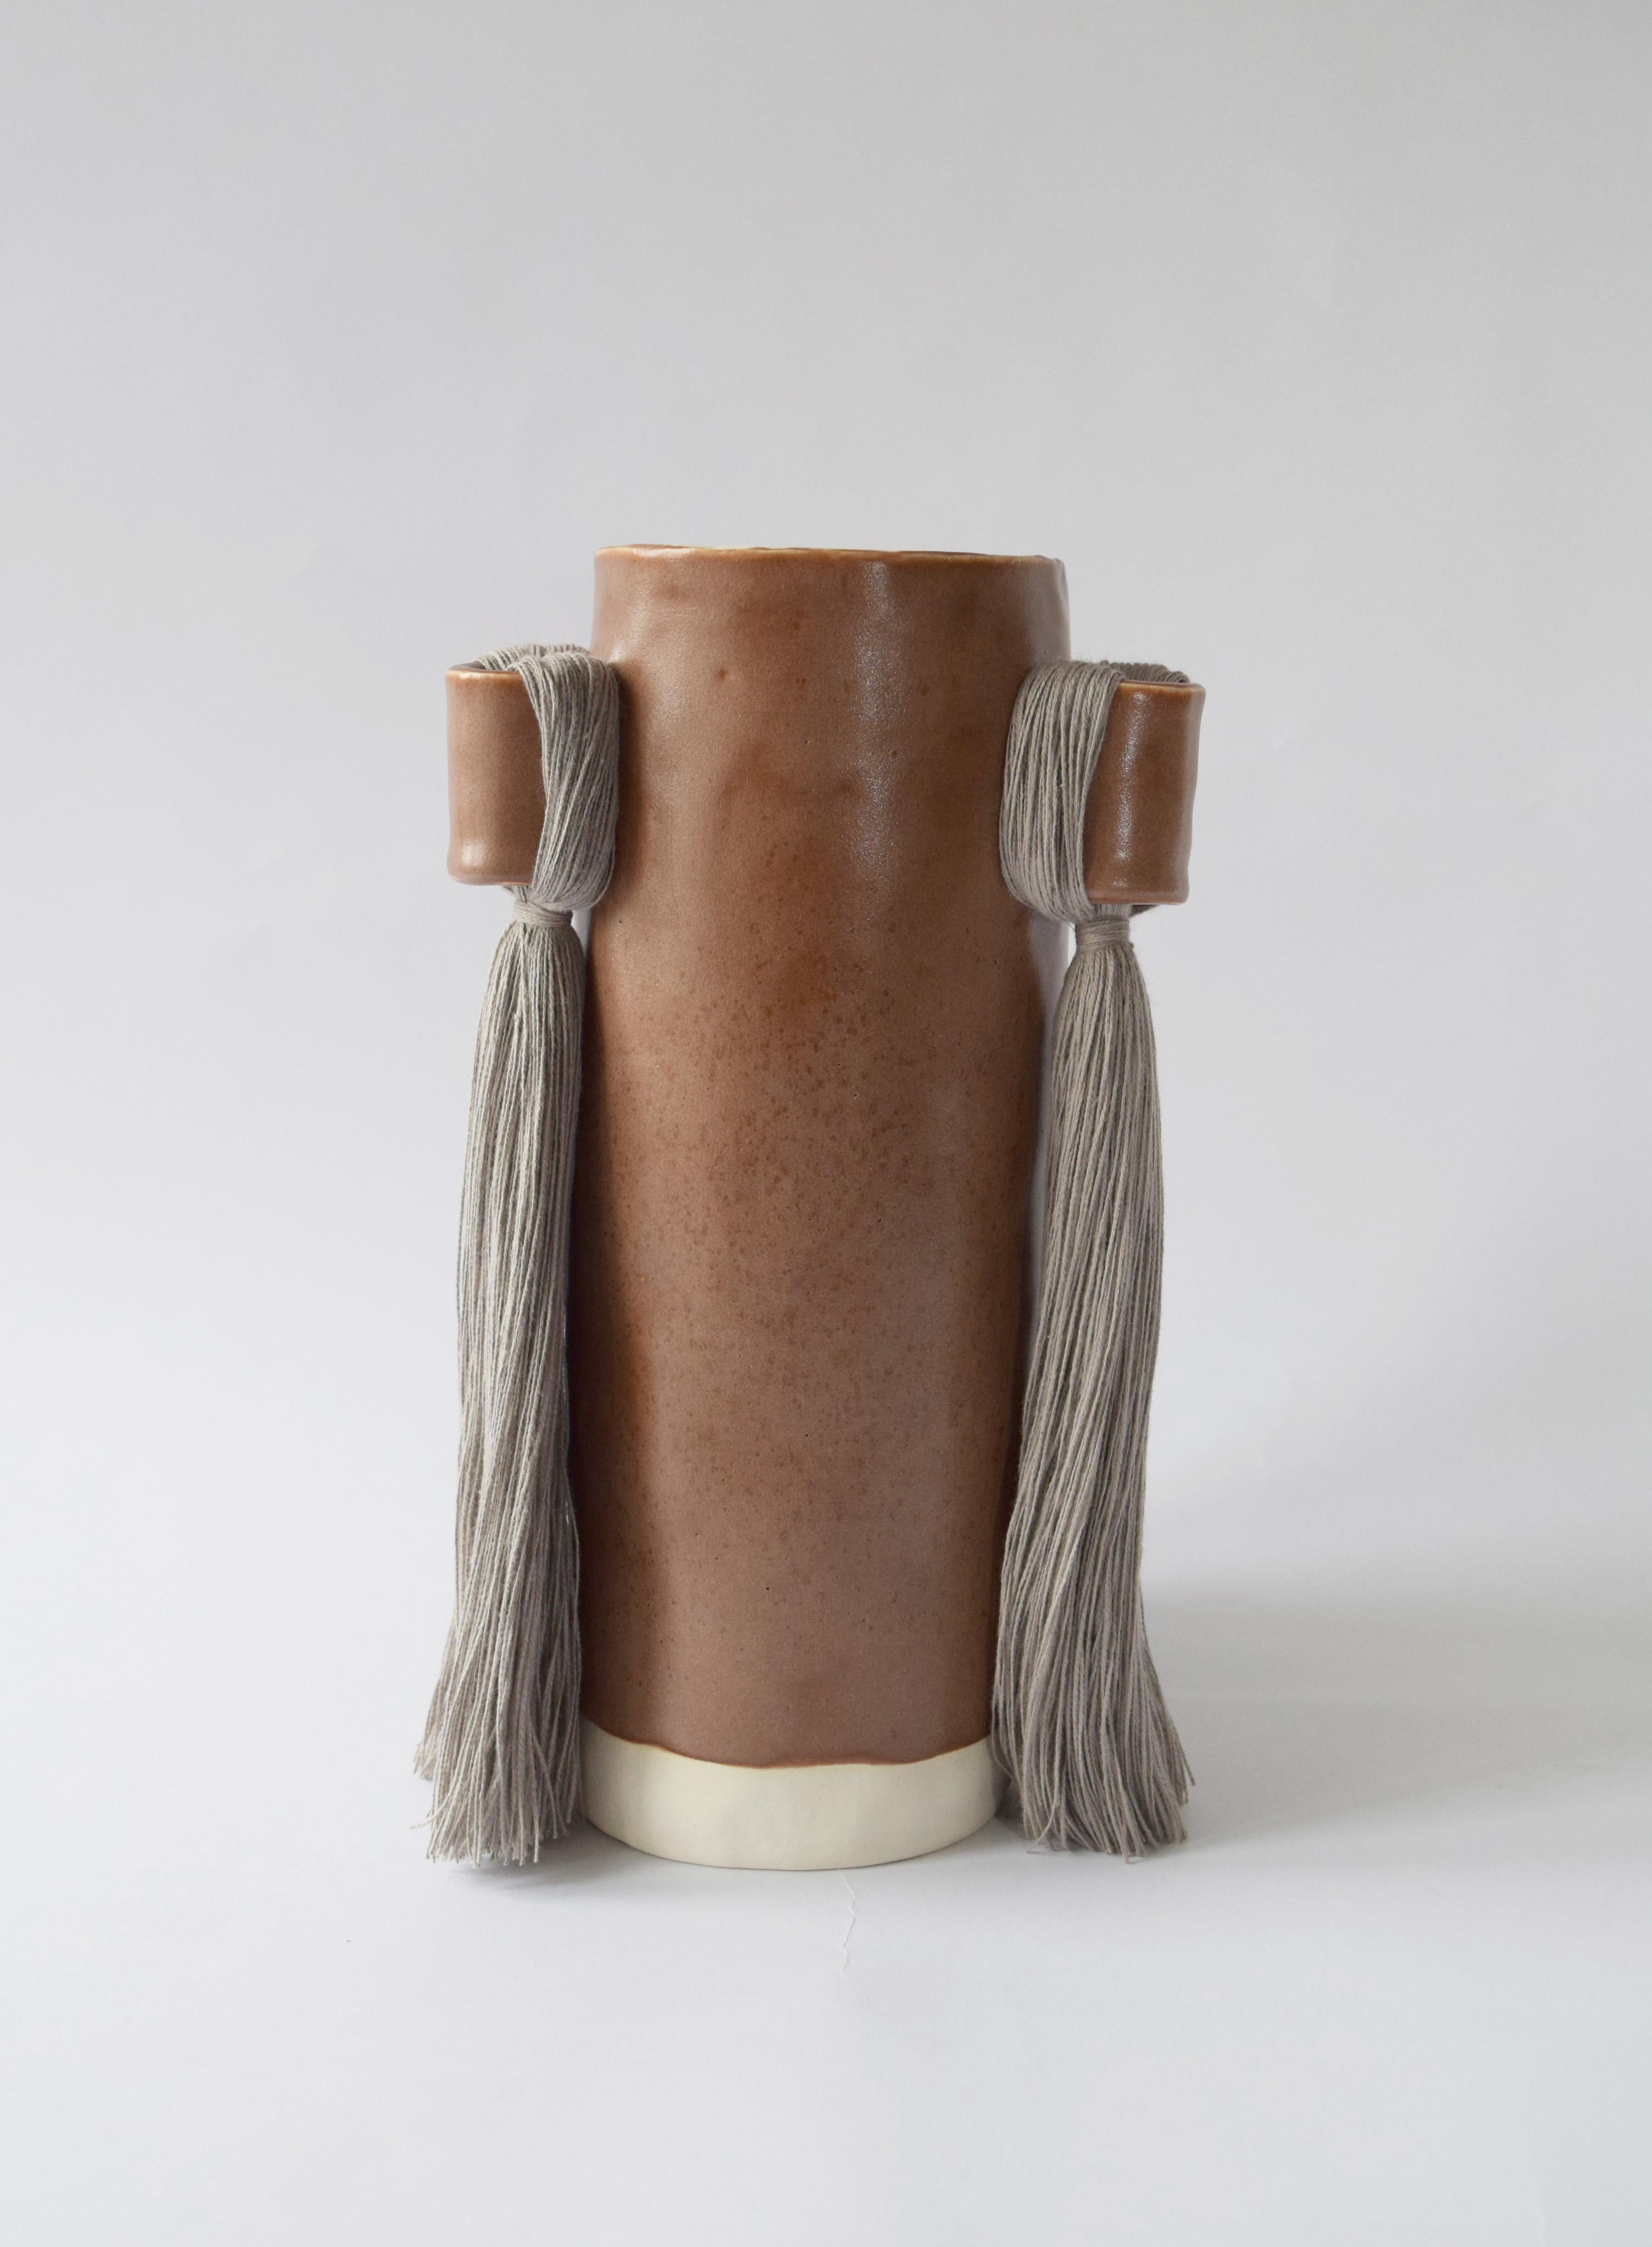 American Handmade Vase #607 in Brown with Gray Cotton Fringe